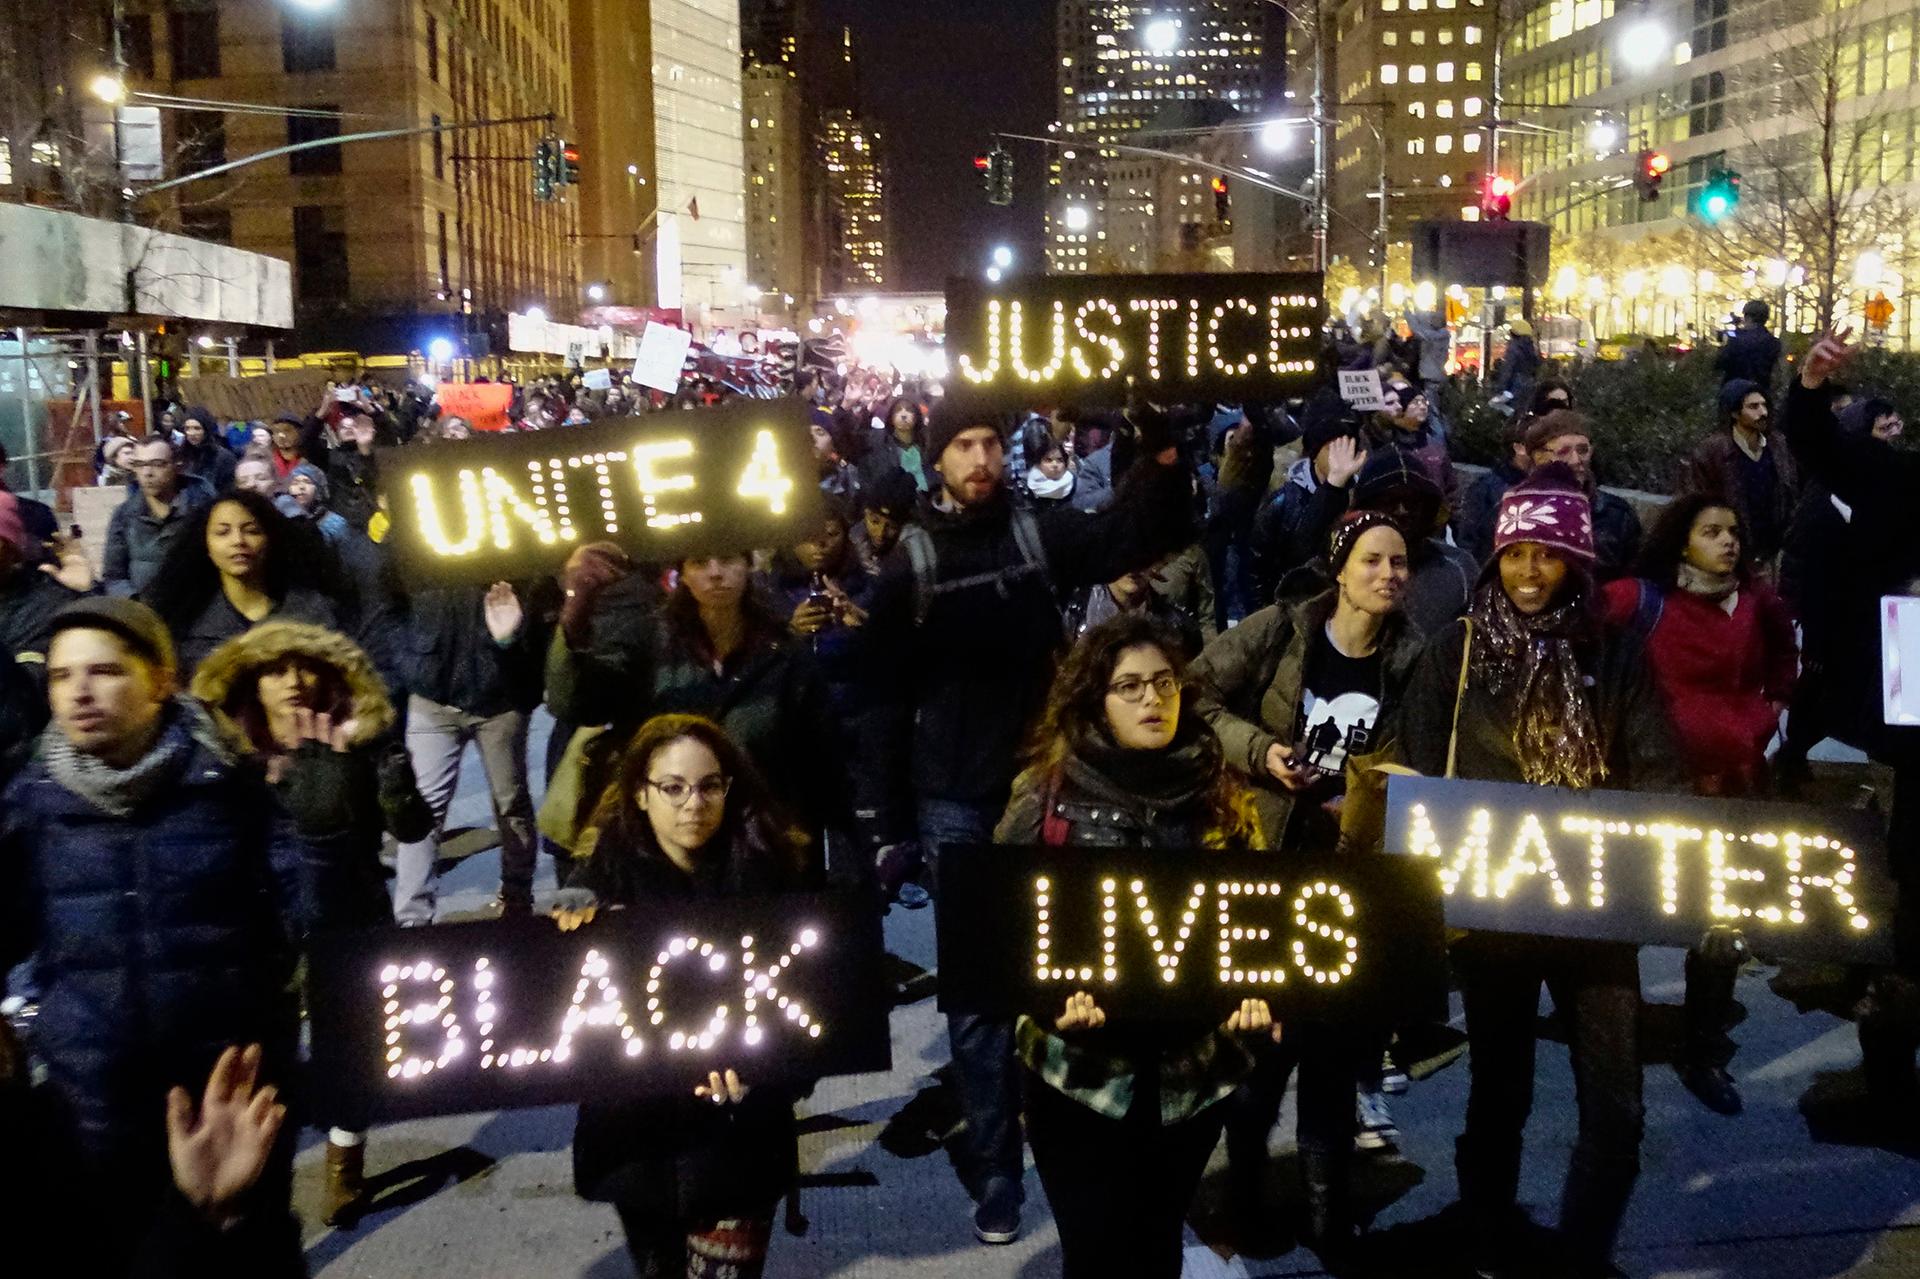 Protesters demonstrate in Lower Manhattan on December 4, 2014, demanding justice for the death of Eric Garner.